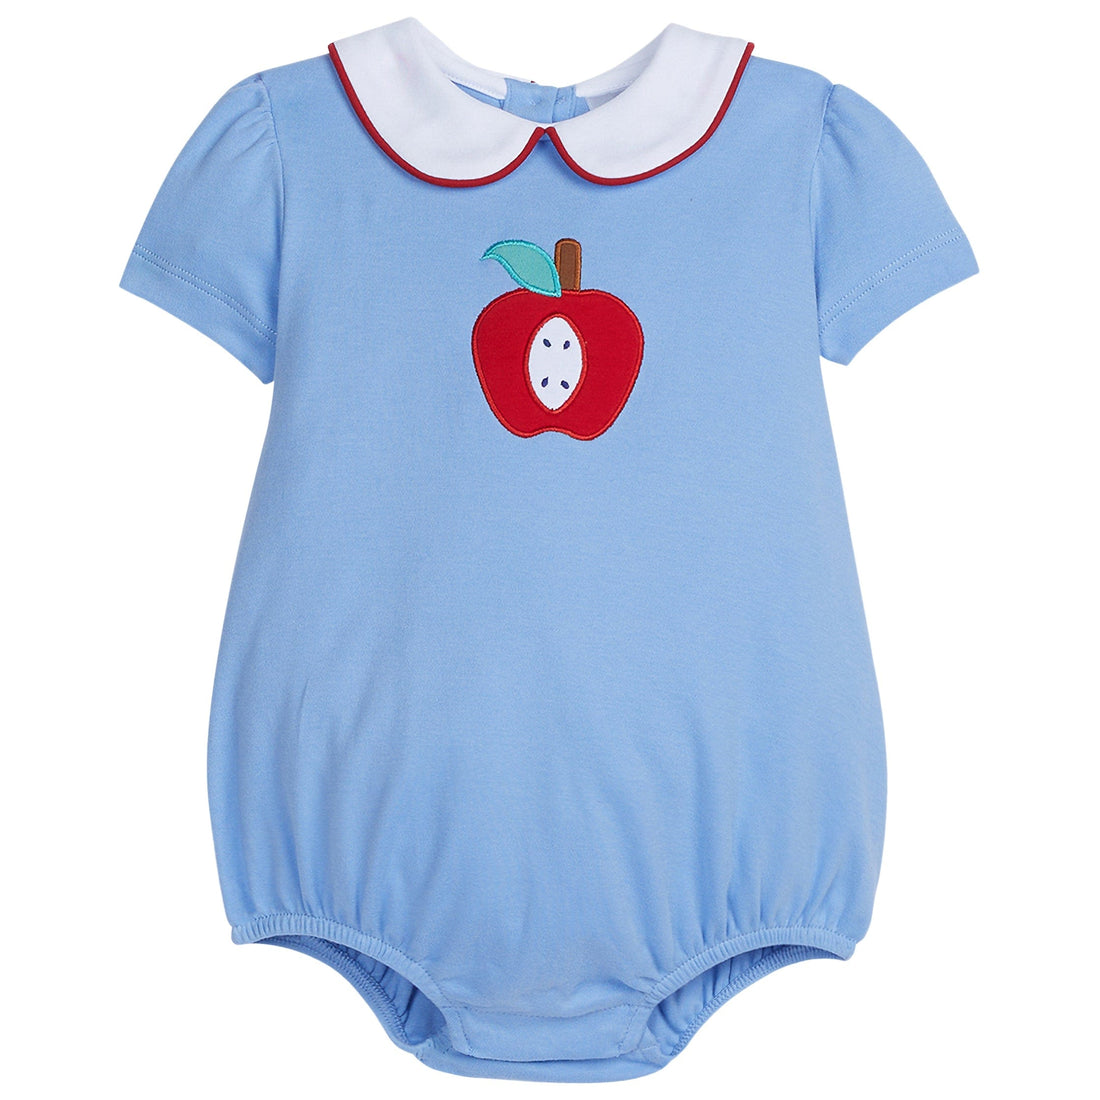 little english classic childrens clothing girls light blue bubble with peter pan collar and applique apple